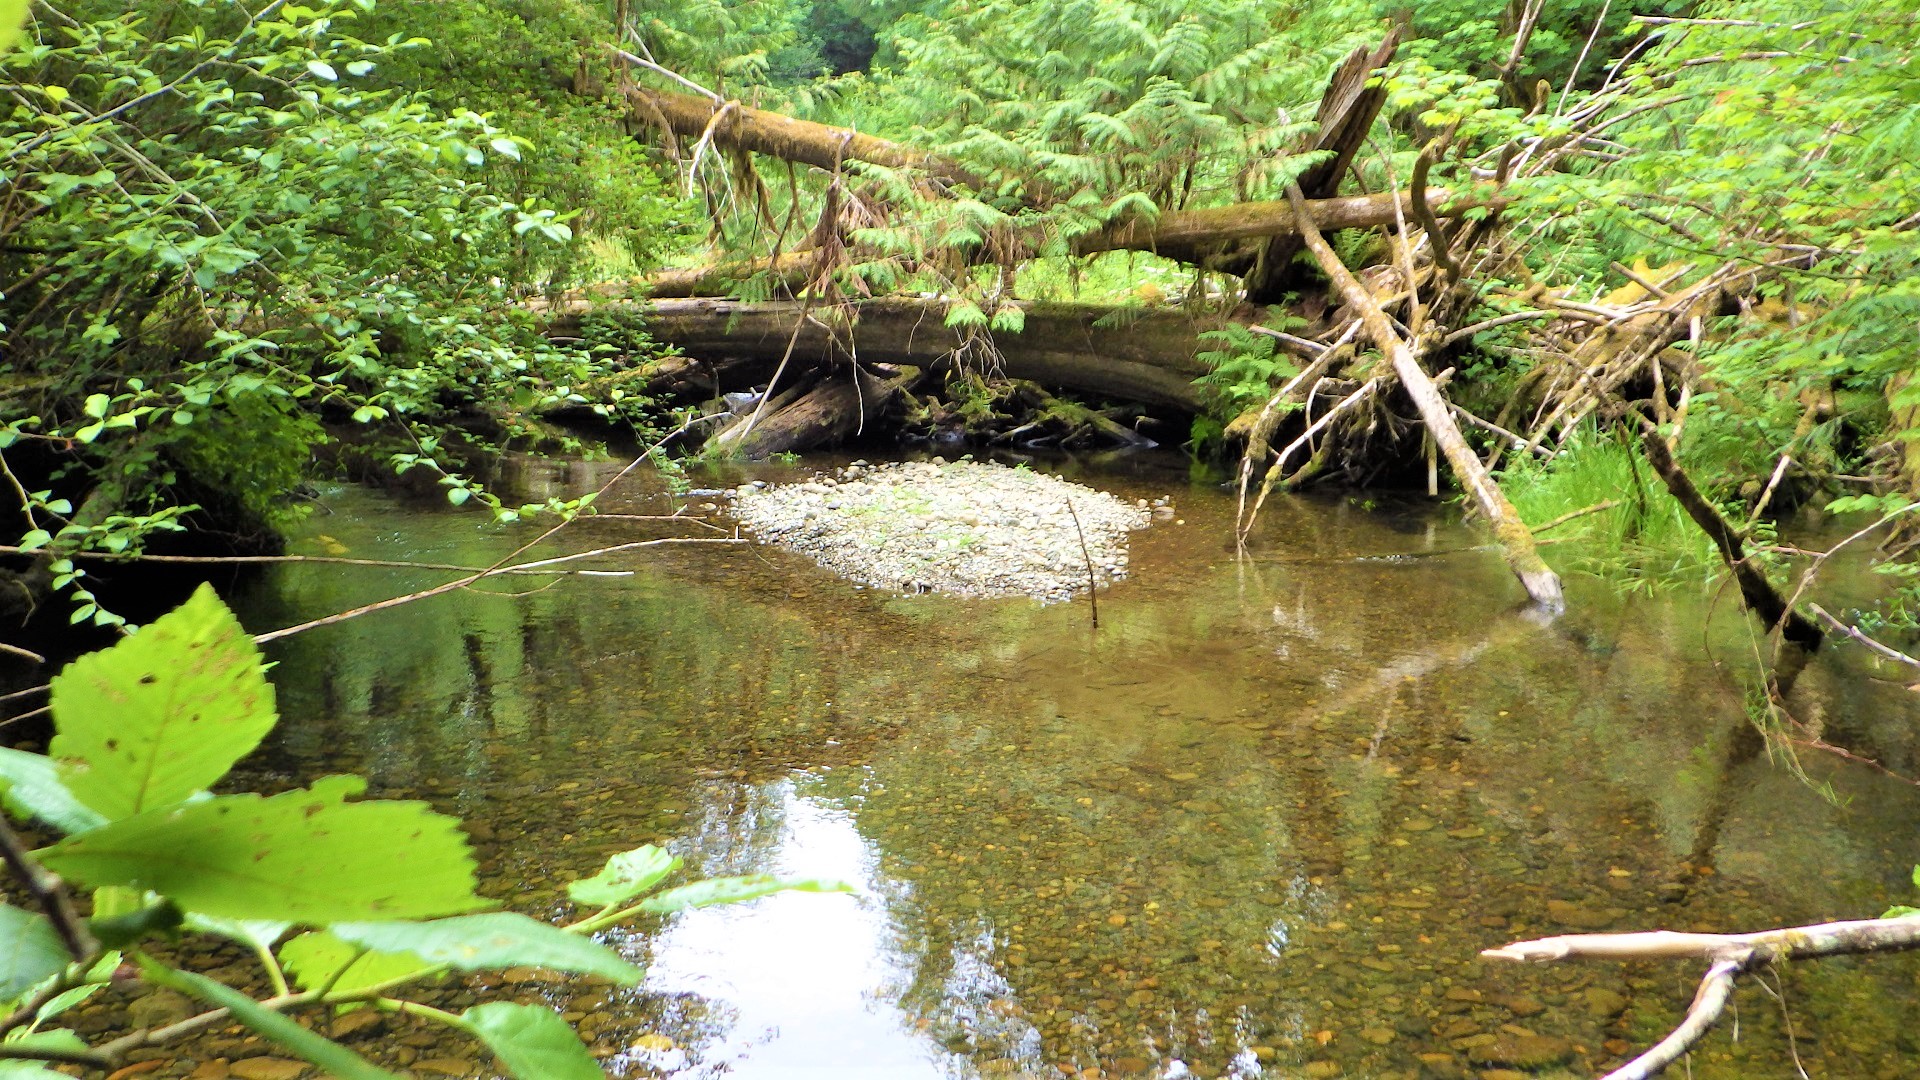 A stream with a sand bar and fallen trees